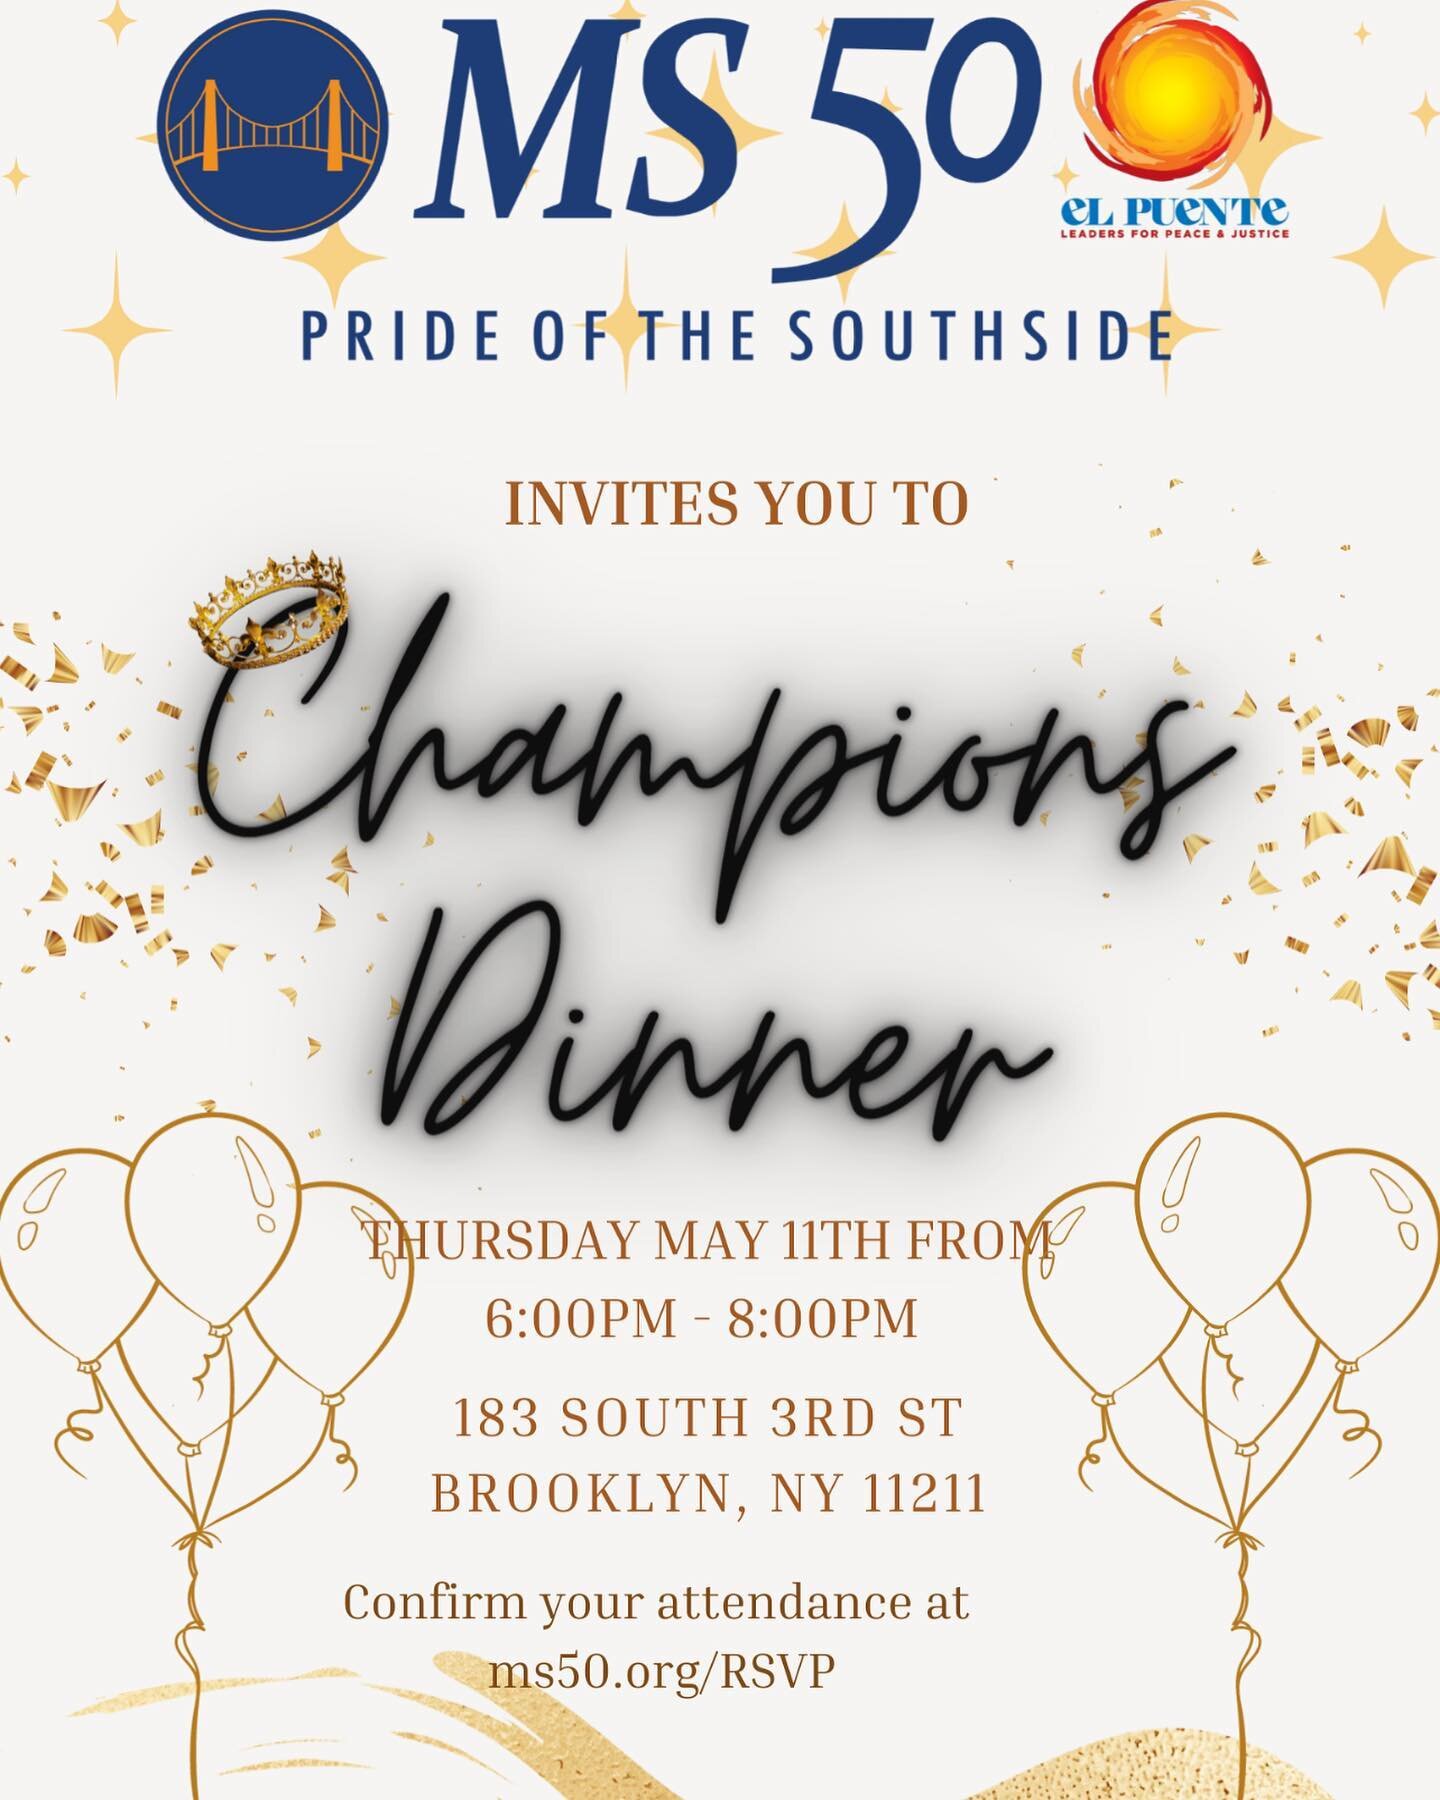 Join us this Thursday for our Annual Champions Dinner!